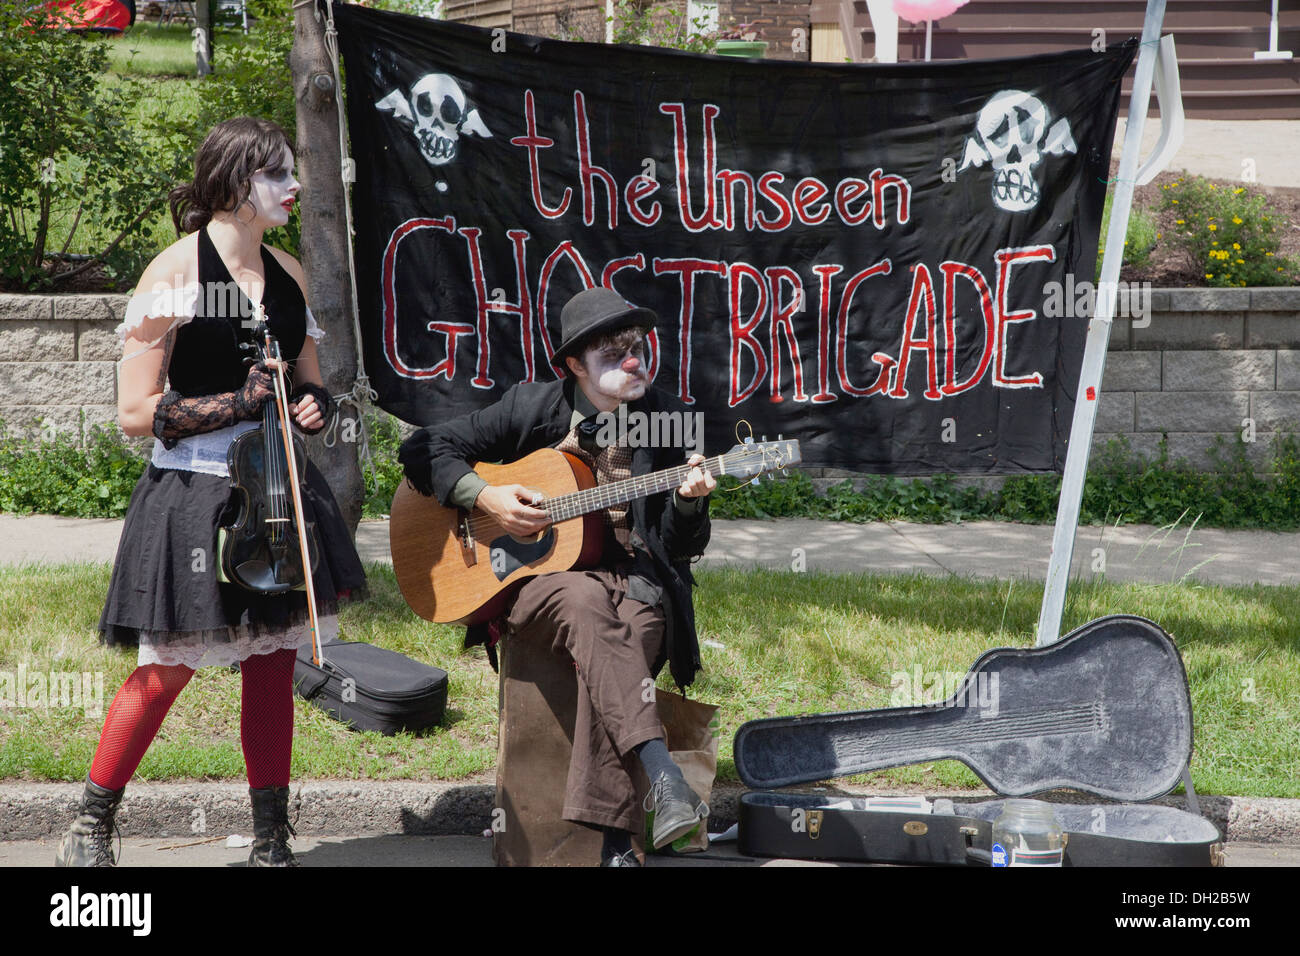 The wonderful music coming from the Unseen Ghost Brigade. Grand Old Day Festival St Paul Minnesota MN USA Stock Photo